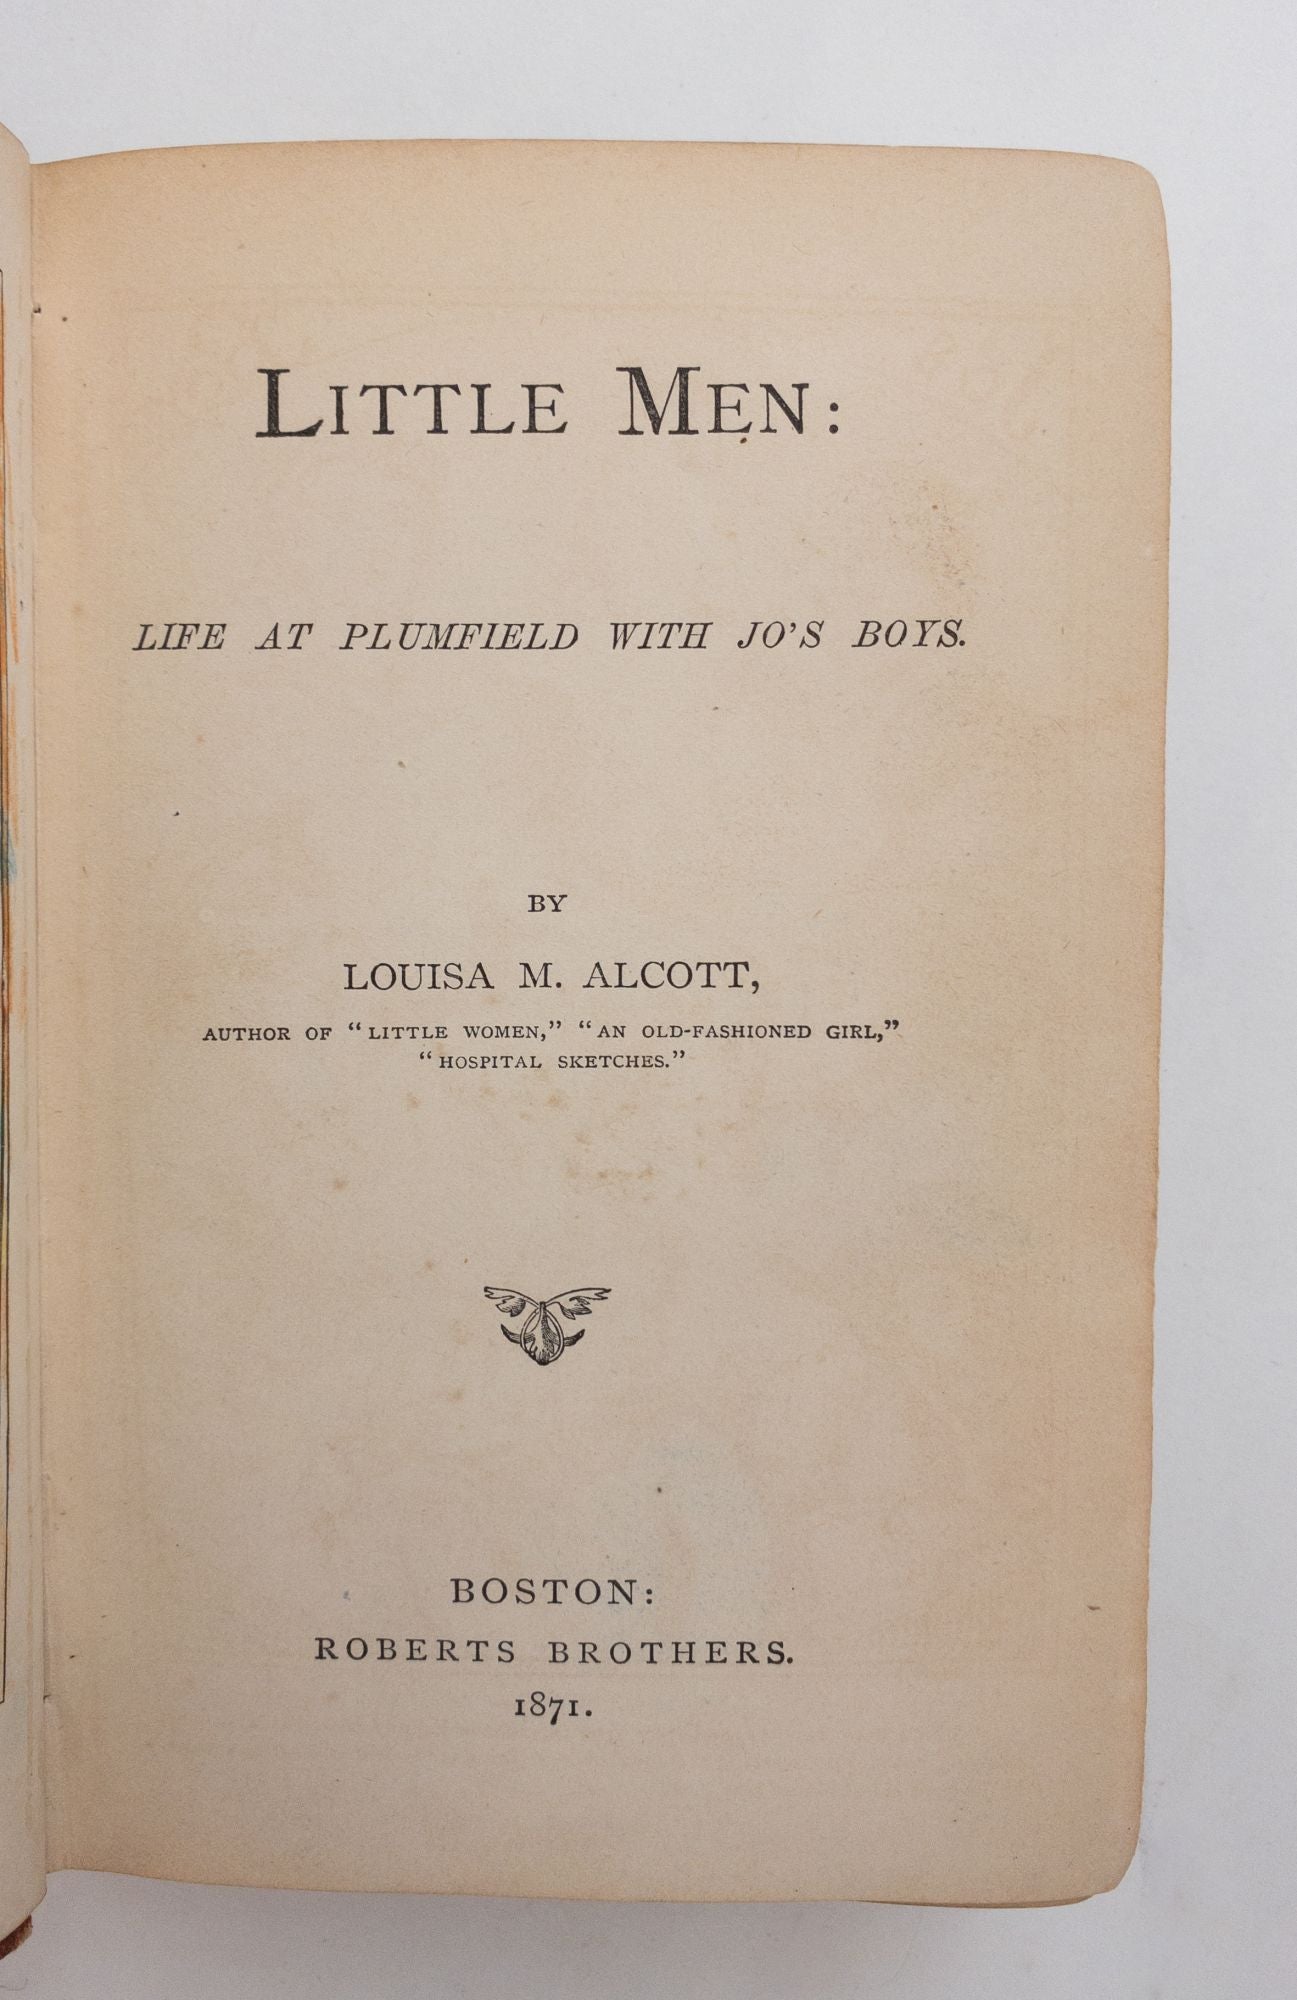 Product Image for LITTLE WOMEN, OR MEG, JO, BETH, AND AMY [Two Volumes]